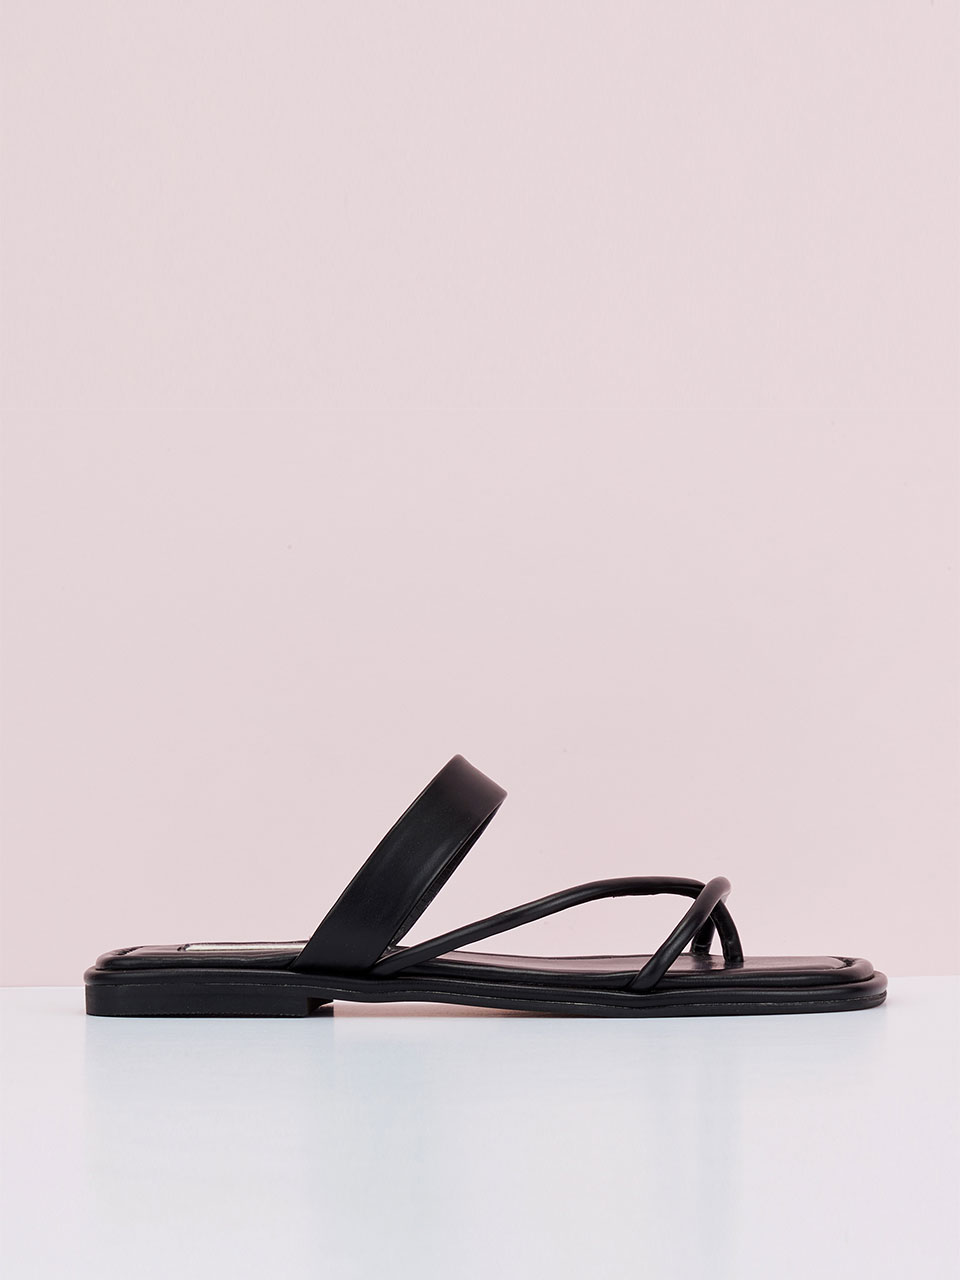 Double string slippers (Black)